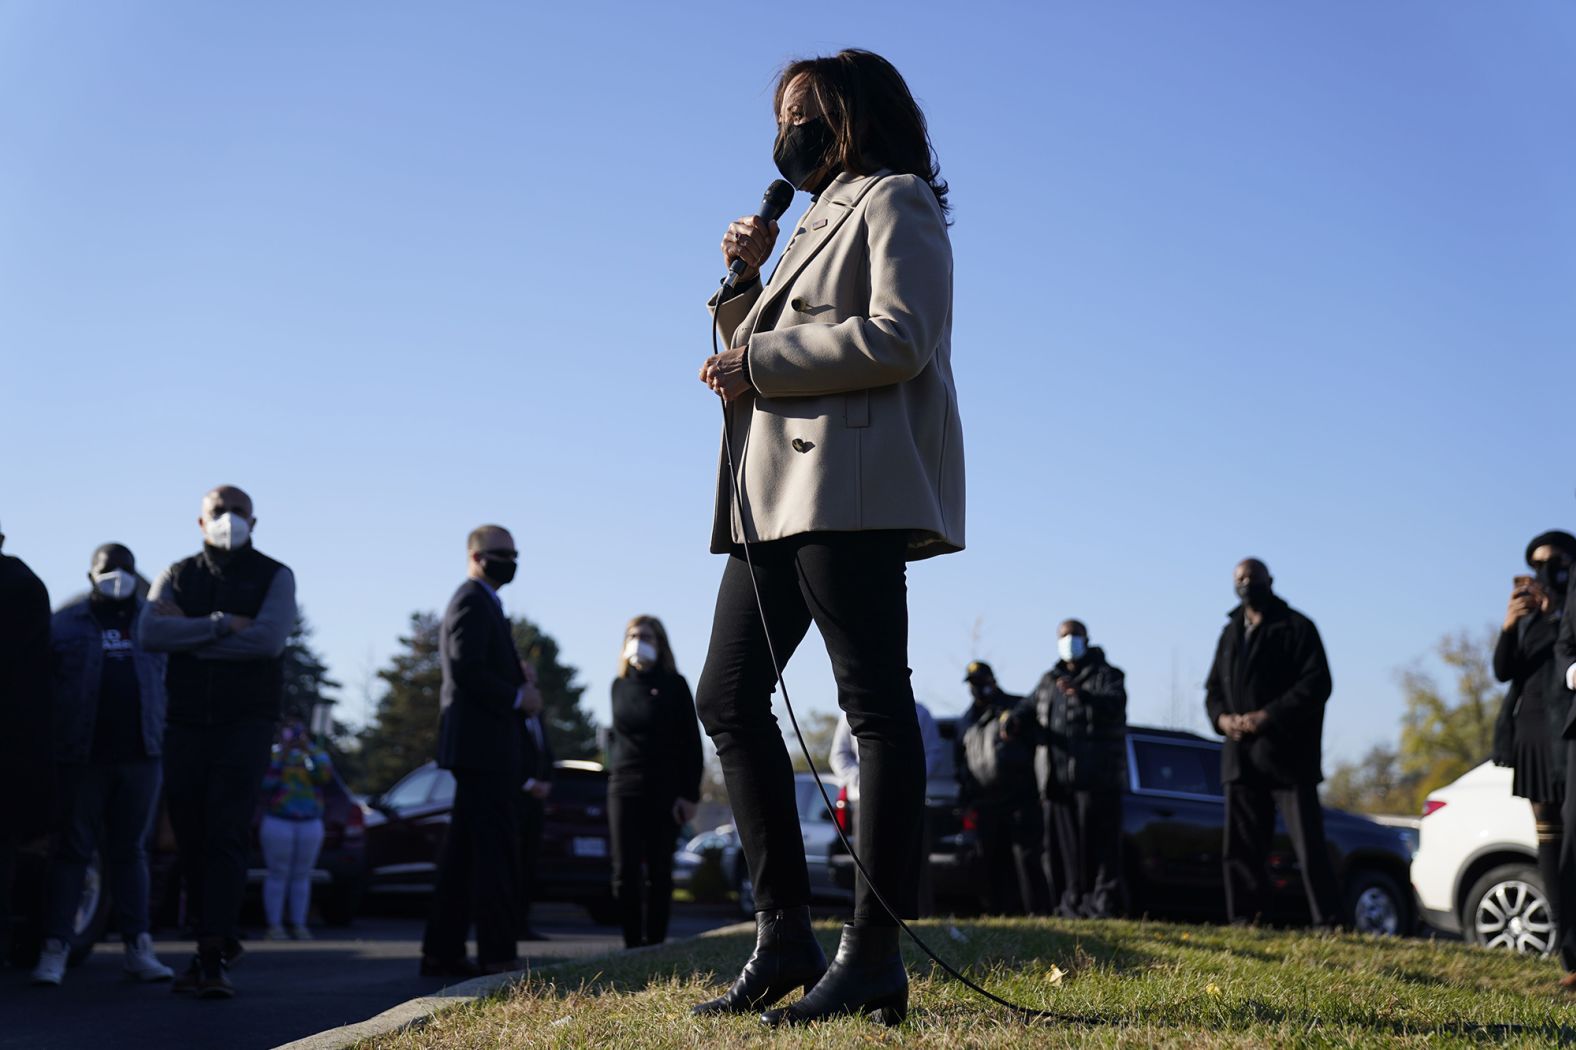 US Sen. Kamala Harris, Biden's running mate, visits a polling location in Detroit on Election Day. During <a href="index.php?page=&url=https%3A%2F%2Fwww.cnn.com%2Fpolitics%2Flive-news%2Felection-results-and-news-11-03-20%2Fh_a217d48cf5e1cc4bcaf3f5011c183030" target="_blank">her surprise stop,</a> she thanked voters for waiting in line.